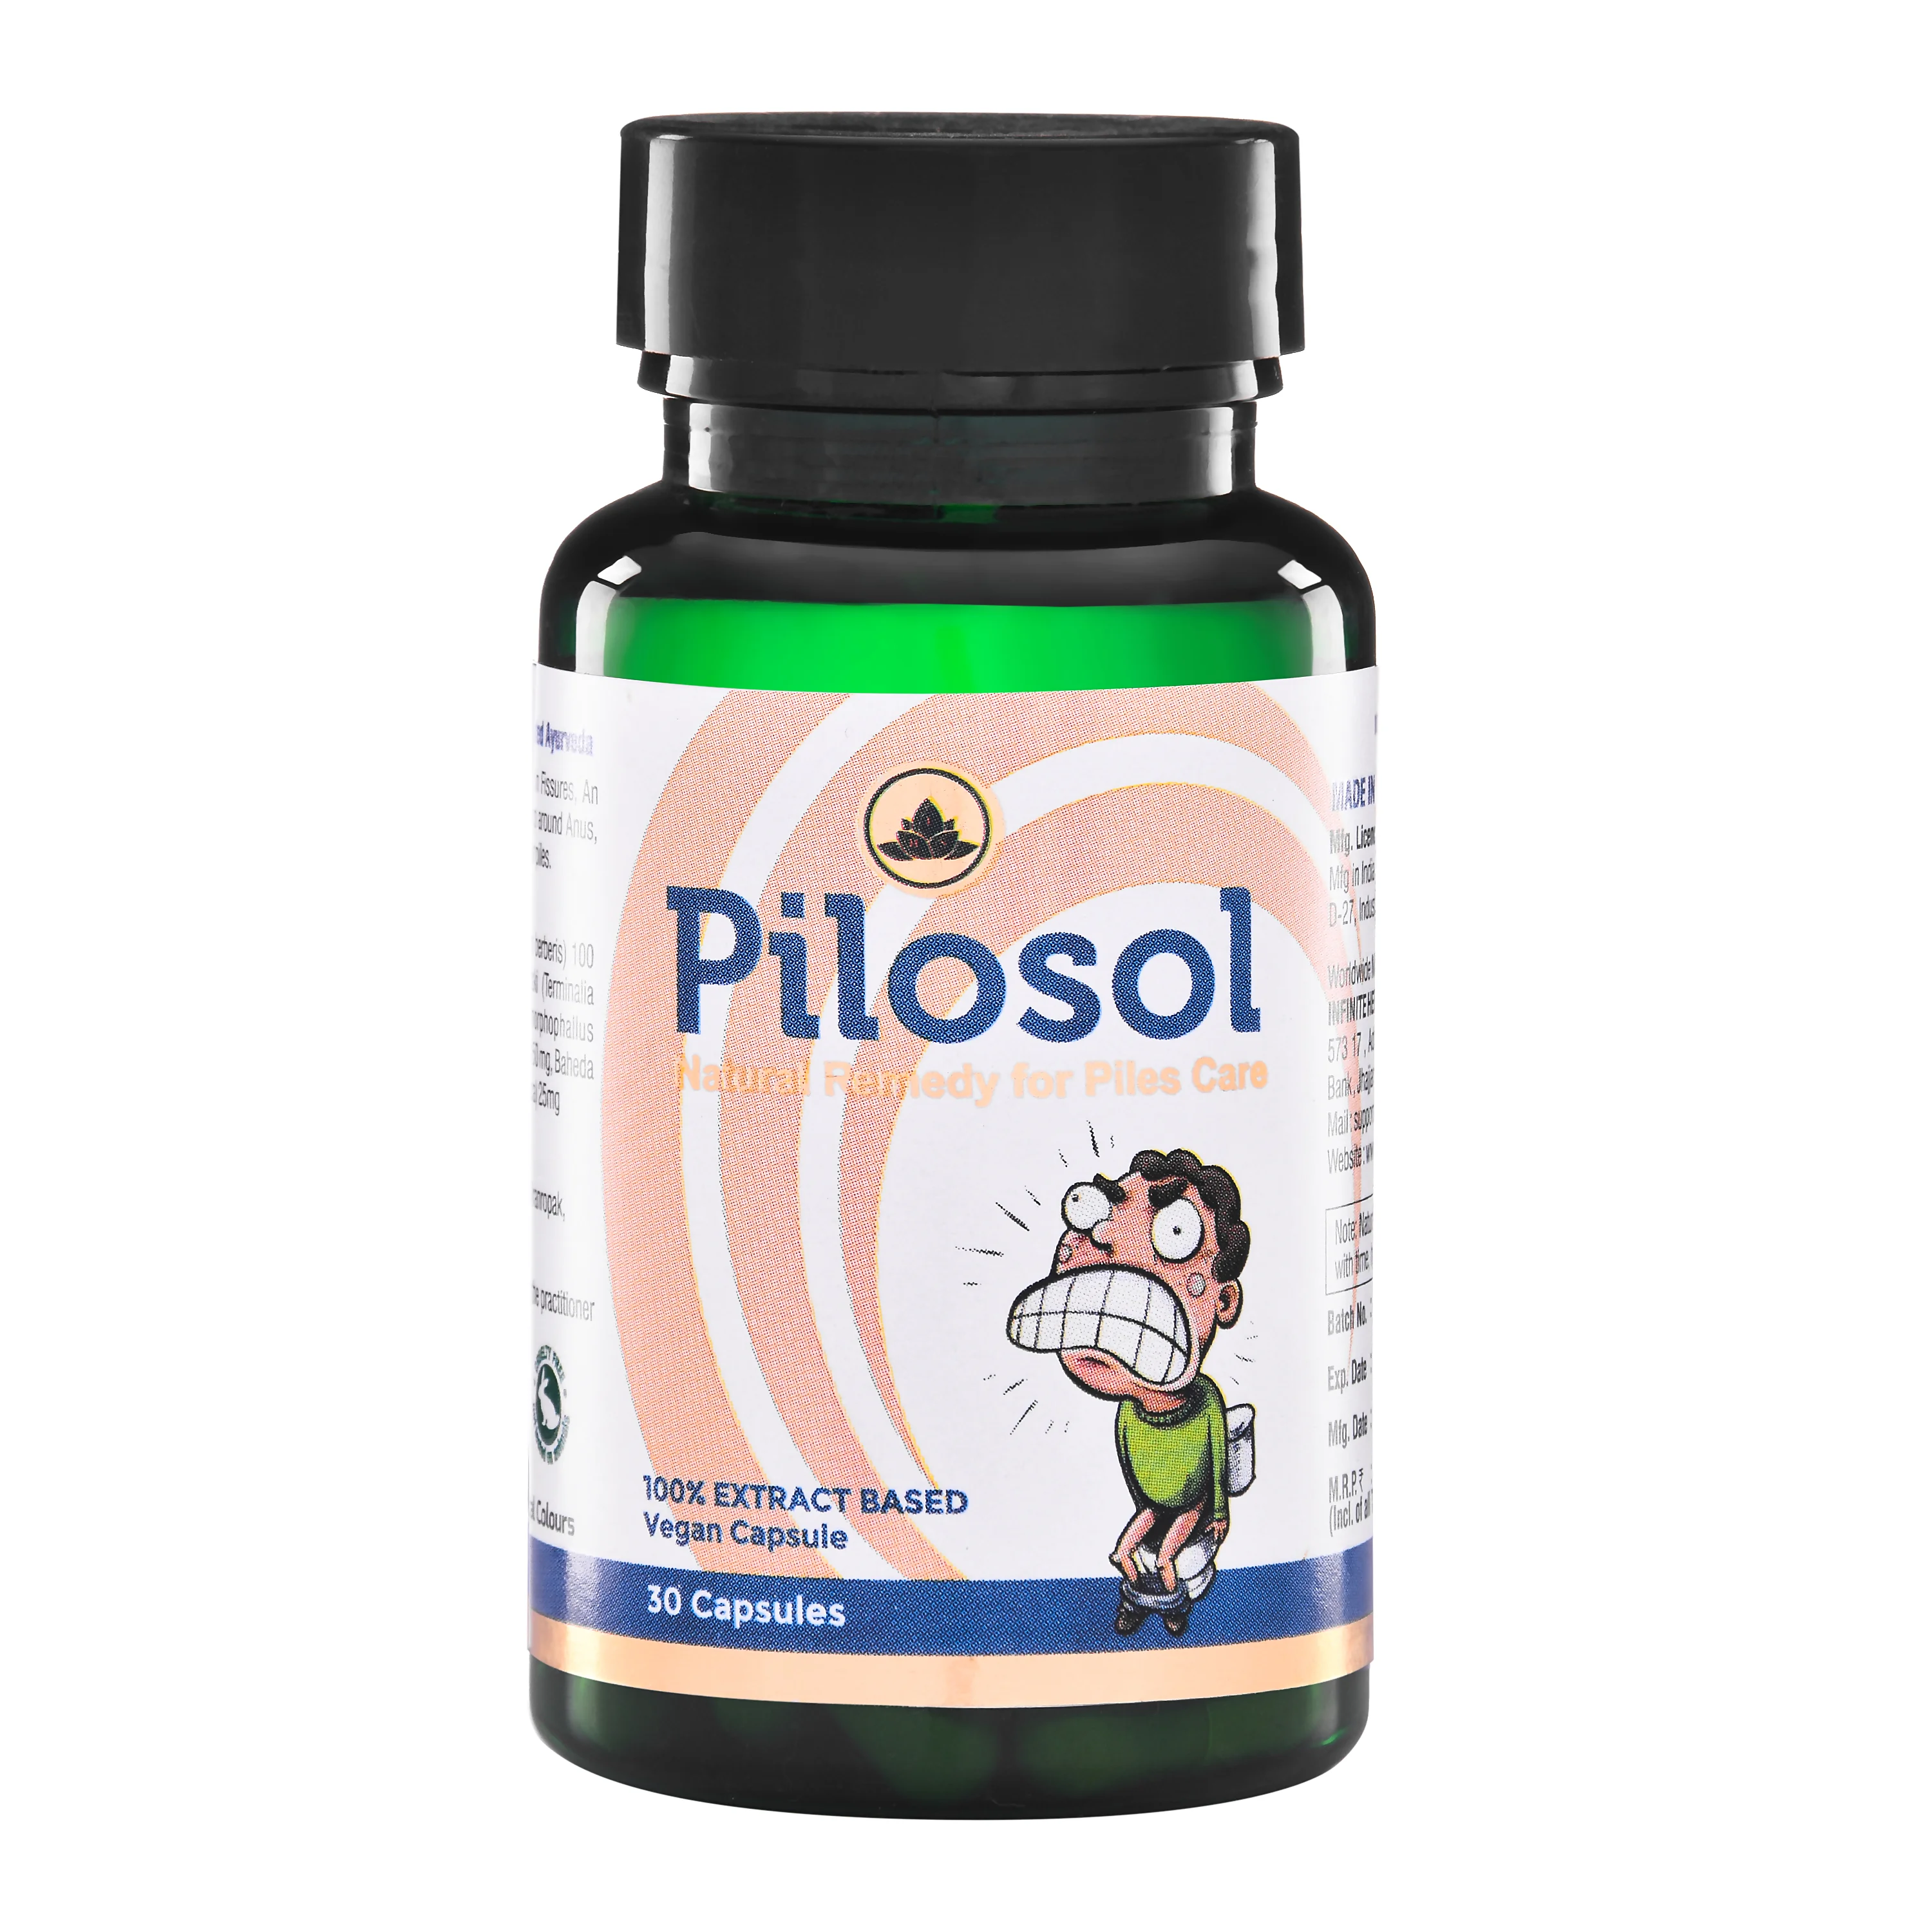 Pilosol Helps with piles symptoms like swelling, pain and itching.